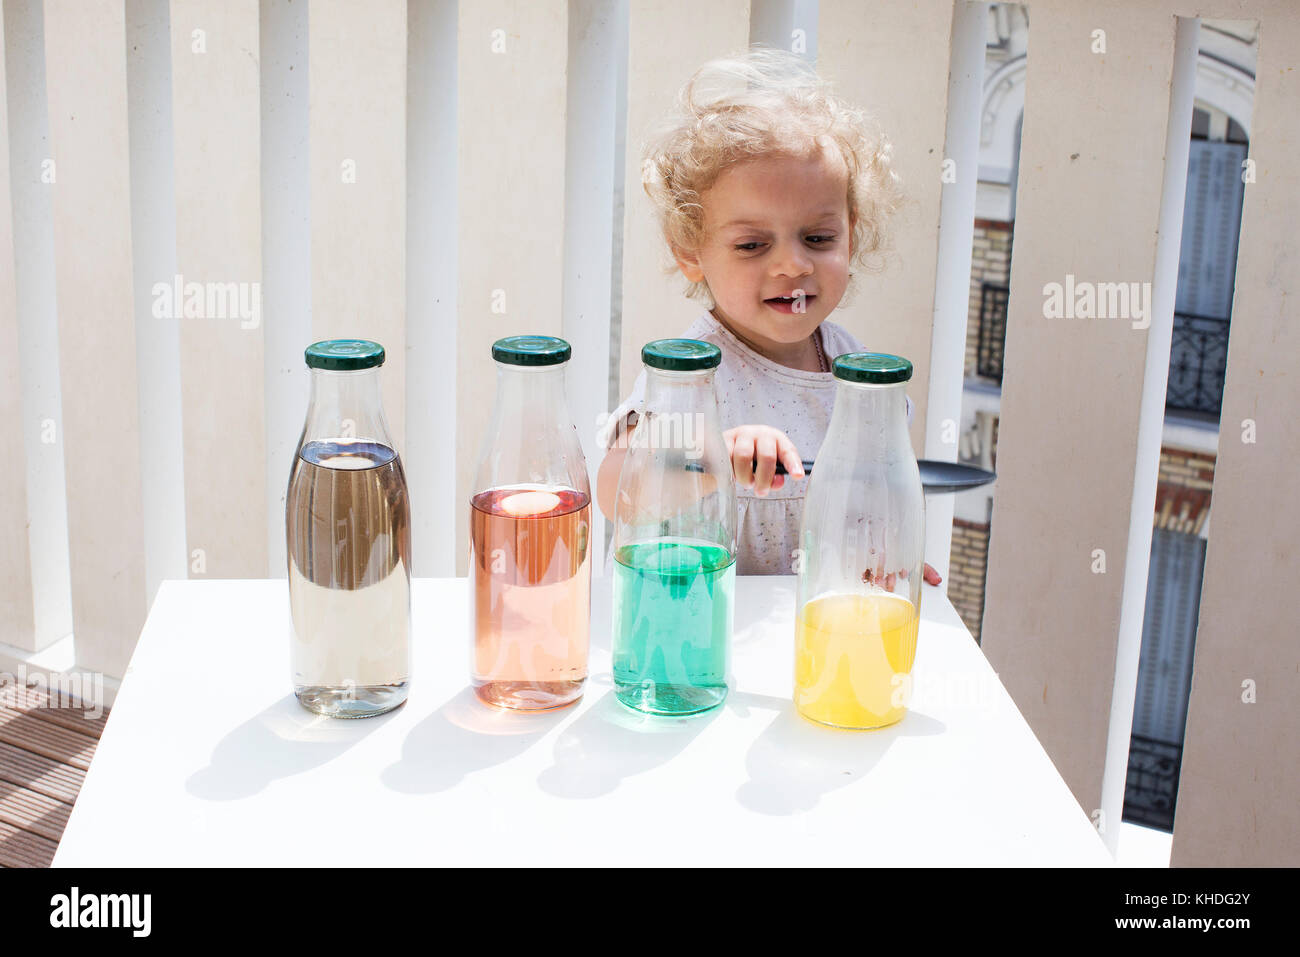 Little girl making sounds tapping bottles of water Stock Photo